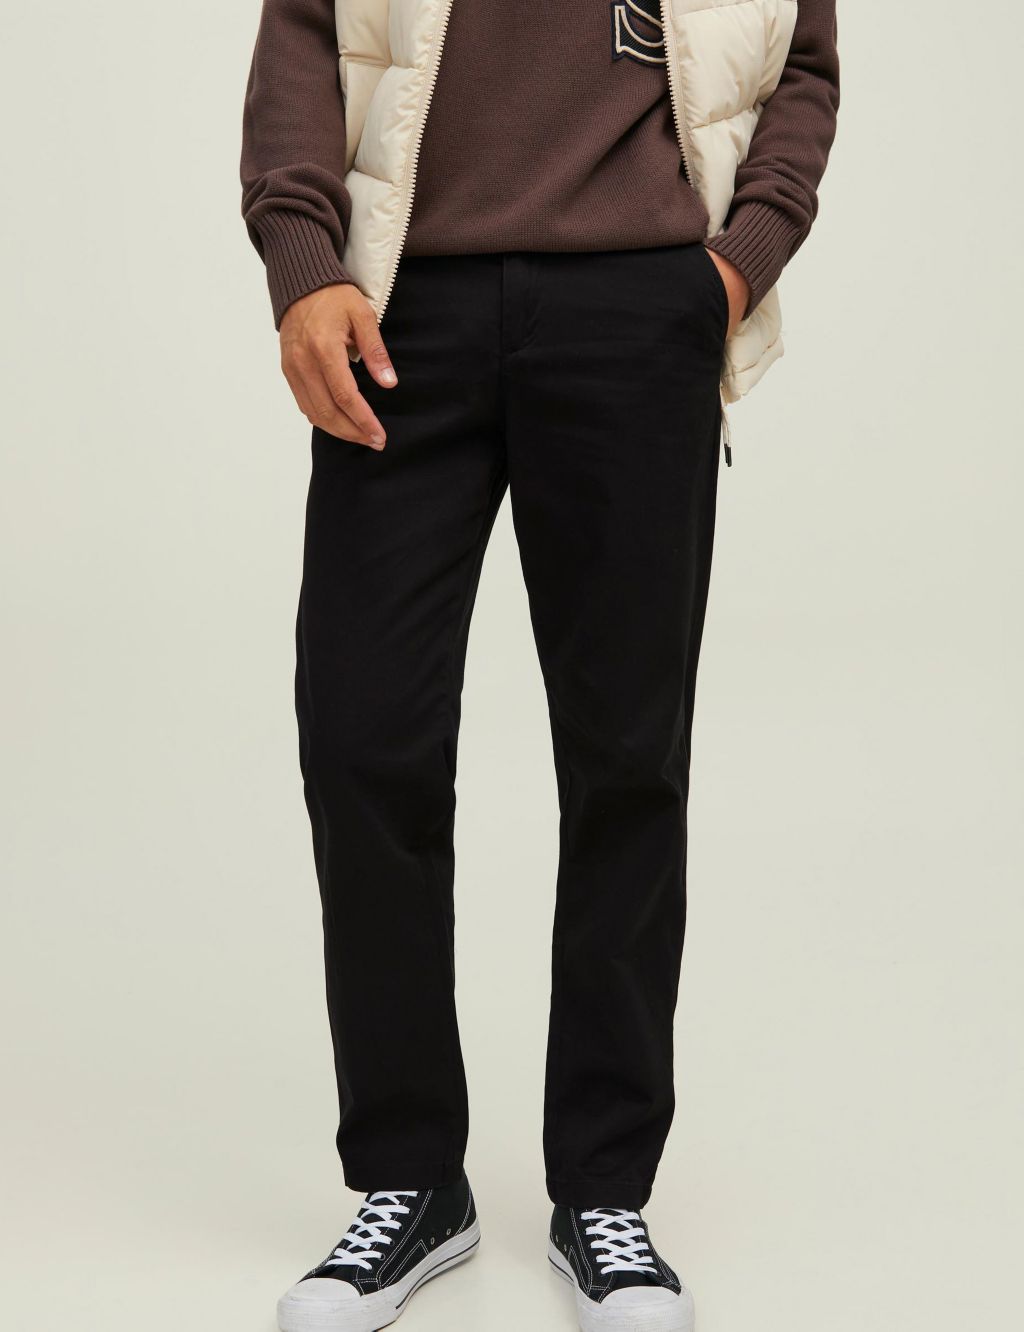 Straight Fit Flat Front Chinos image 1